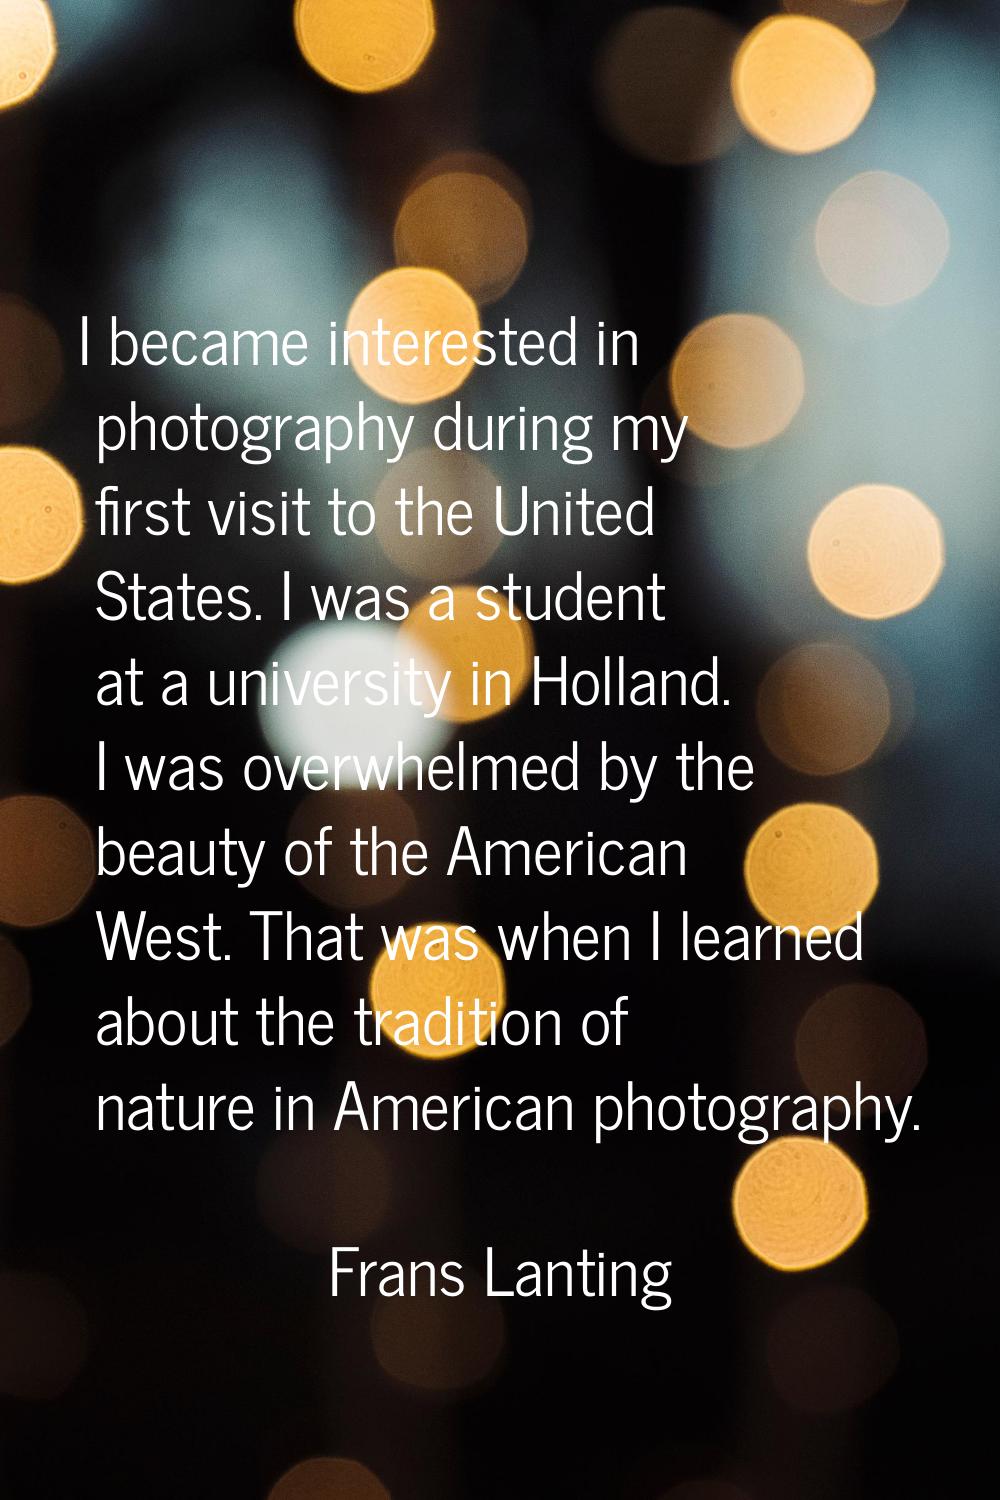 I became interested in photography during my first visit to the United States. I was a student at a